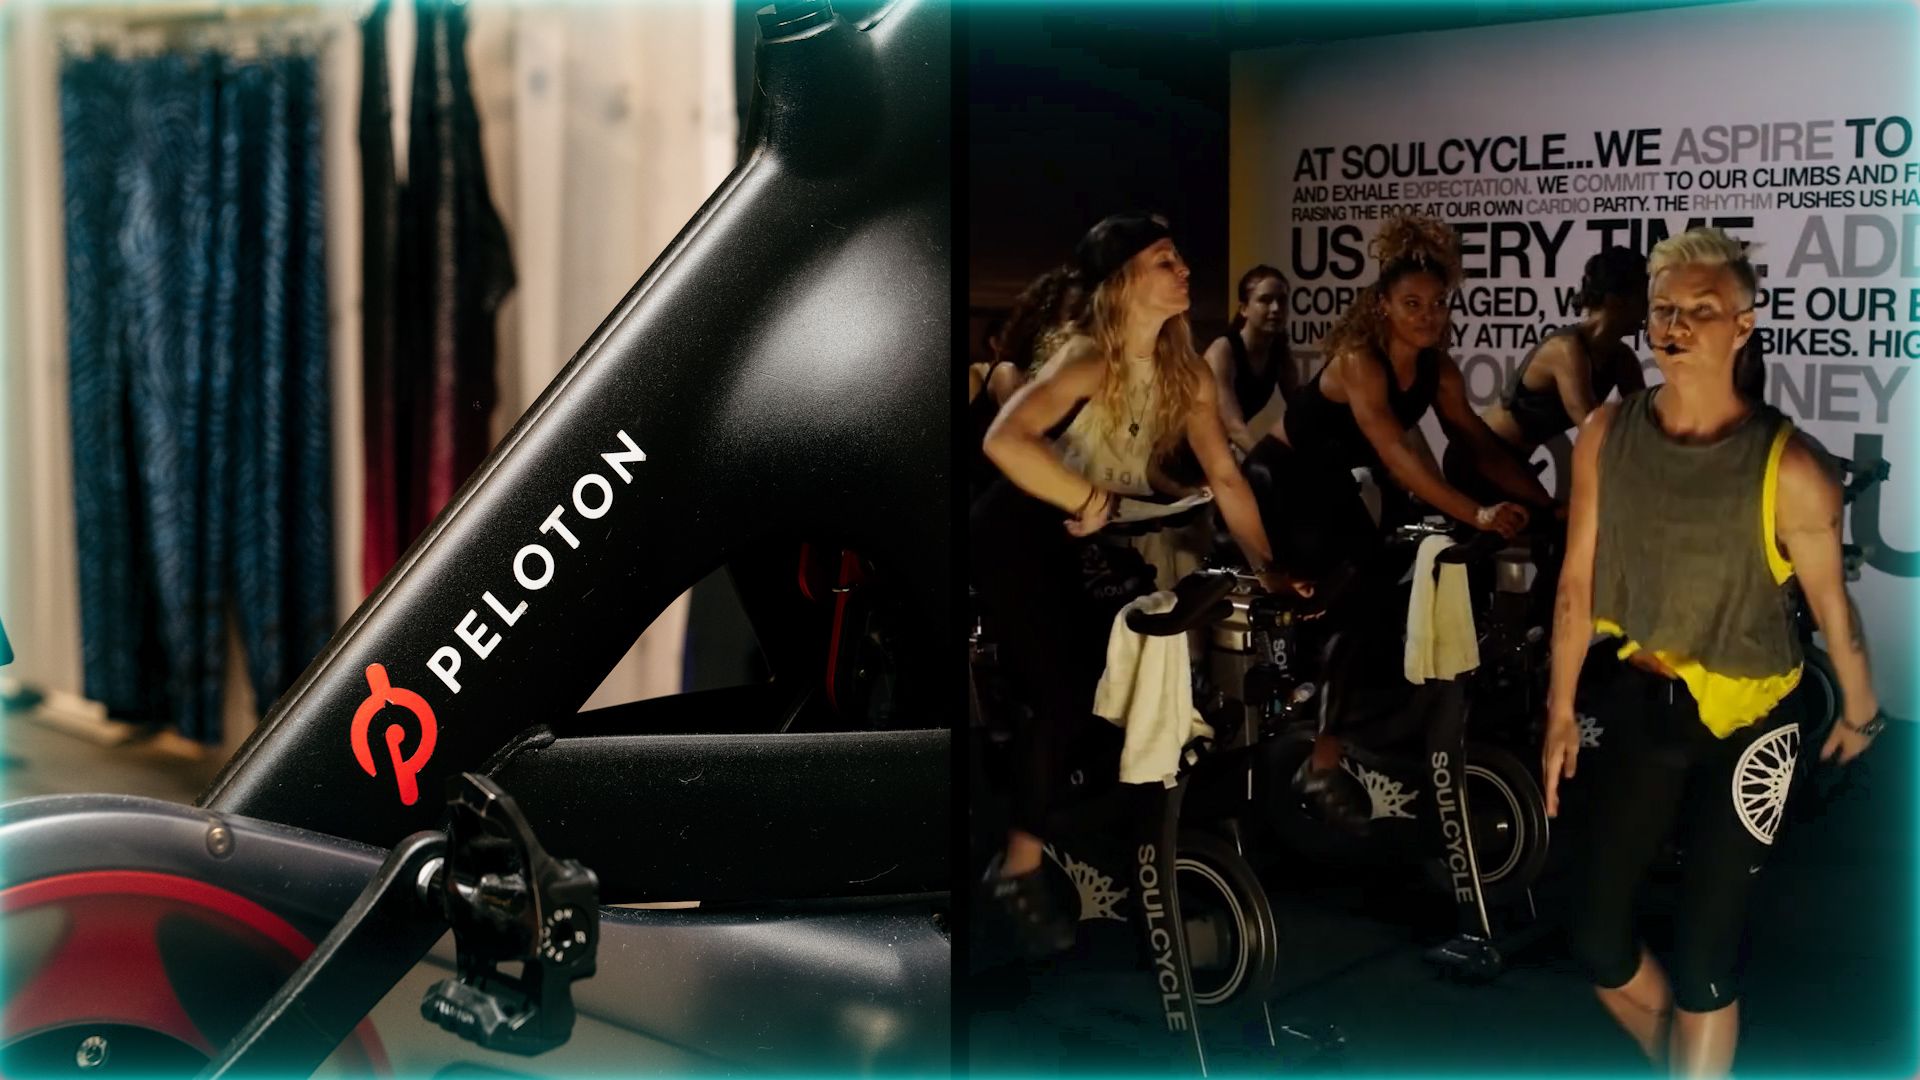 Let bygones be bygones. Peloton and lululemon join hands for content push a  year after lawsuit